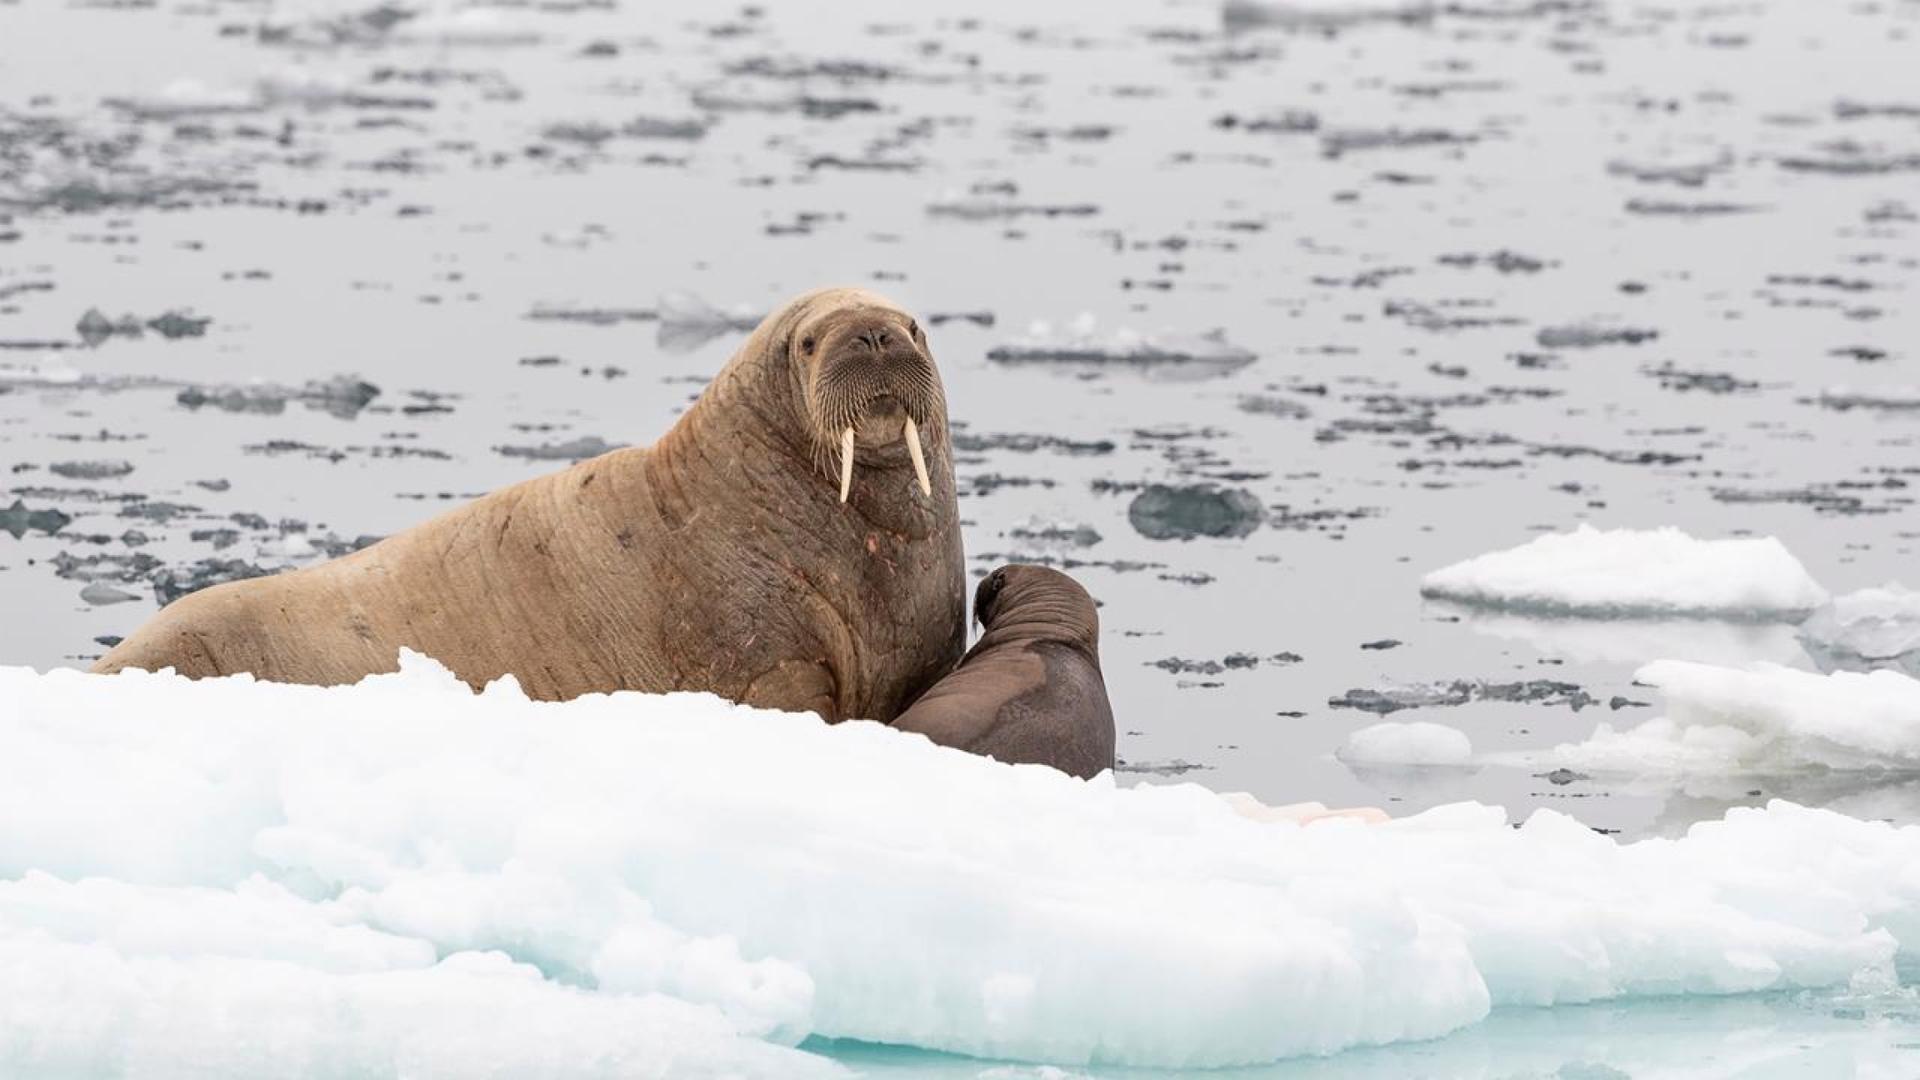 A female Atlantic walrus and her young offspring on an ice floe, Norway.